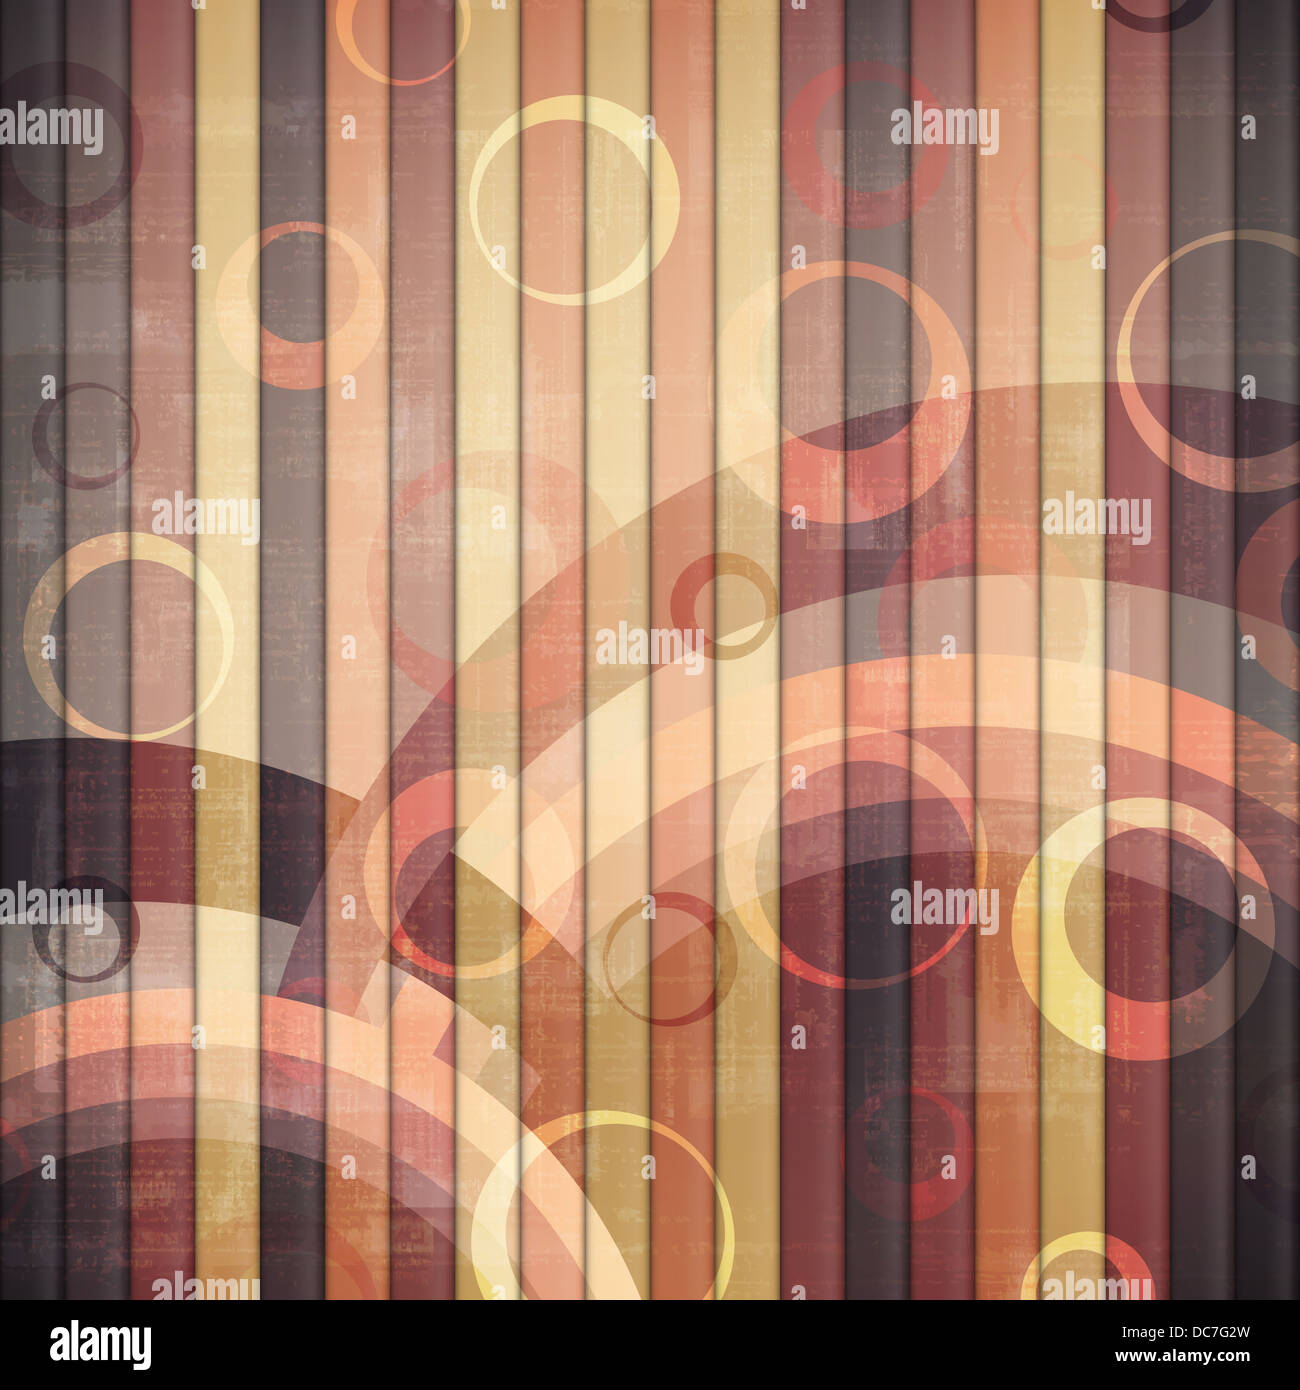 new abstract wallpaper with colored stripes and circles can use like vintage background Stock Photo